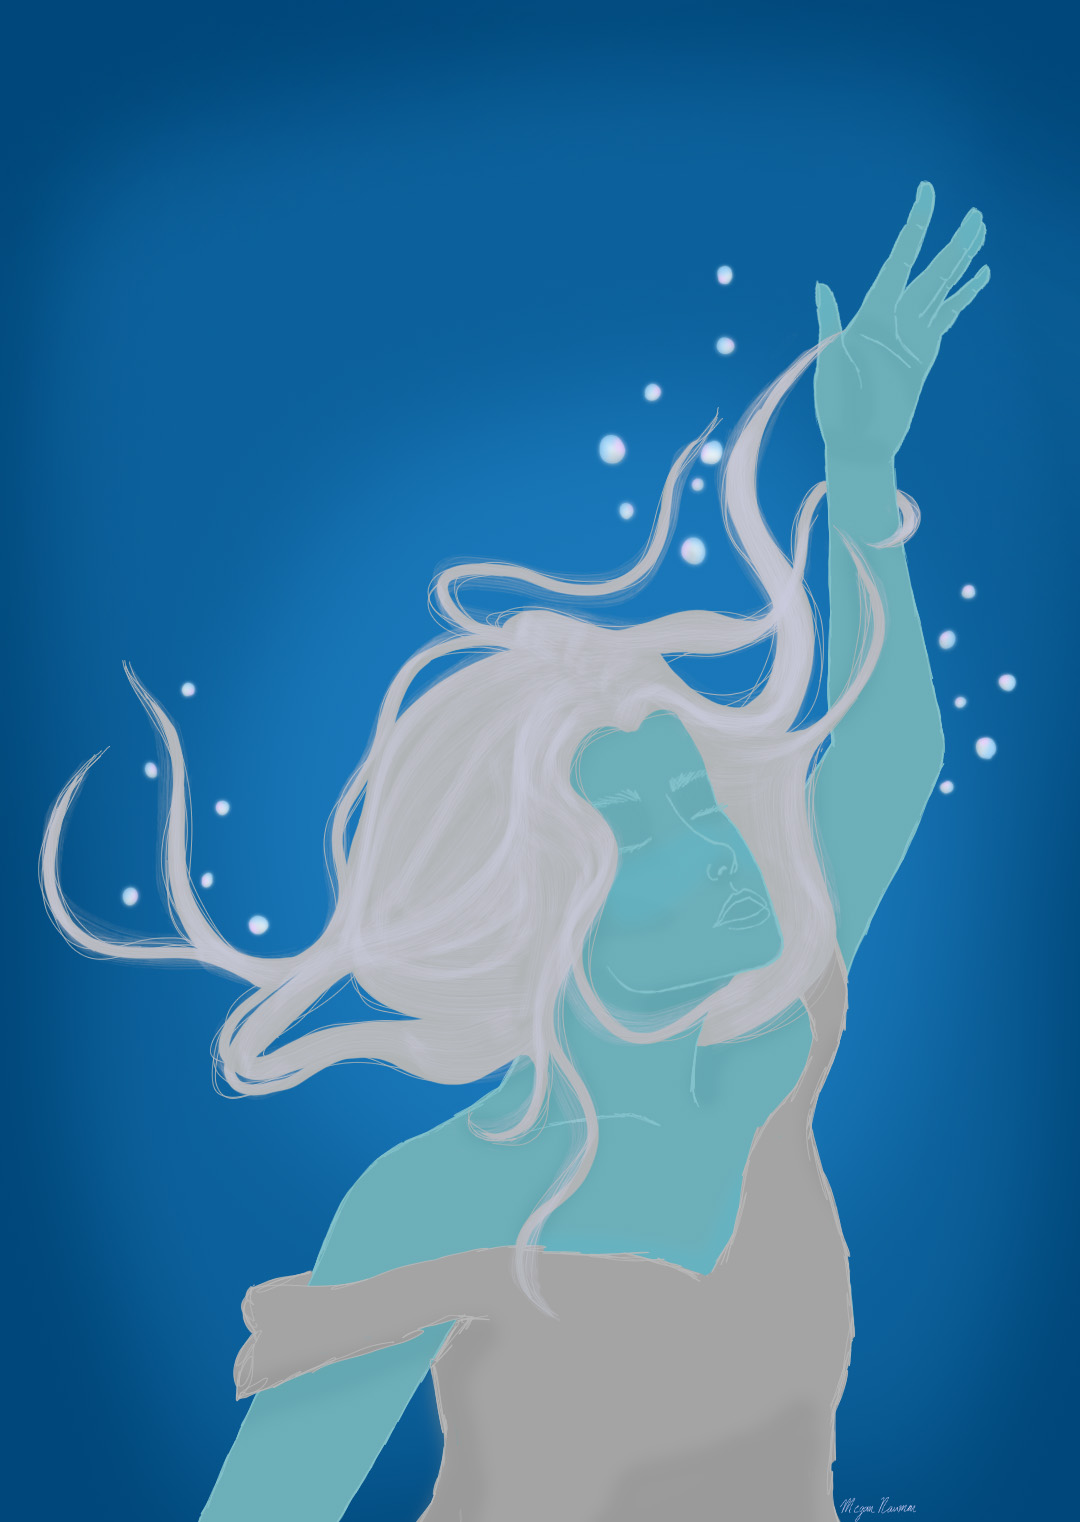 A digital painting of a woman with turquoise skin and white hair against a royal blue background. She is wearing an off the shoulder top with her left hand reaching above her head. Her long hair floats around her head as if she is in water.